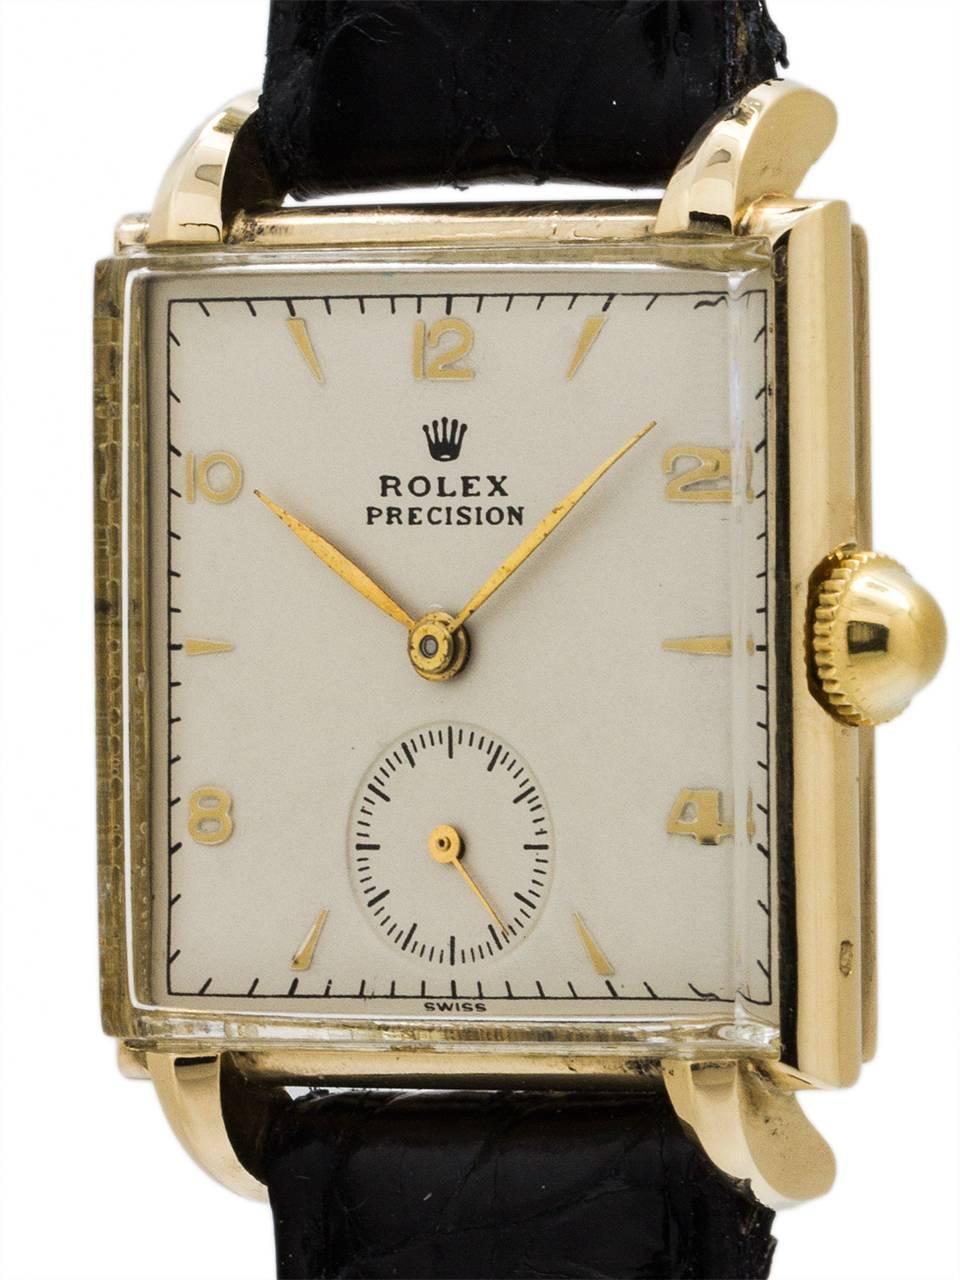 Scarce design vintage Rolex dress model ref 4330 14K yellow gold circa 1940’s. Very pleasing design square case with rounded and sculpted sides, pronounced and well proportioned lugs, contoured mineral glass crystal, original period Rolex mushroom